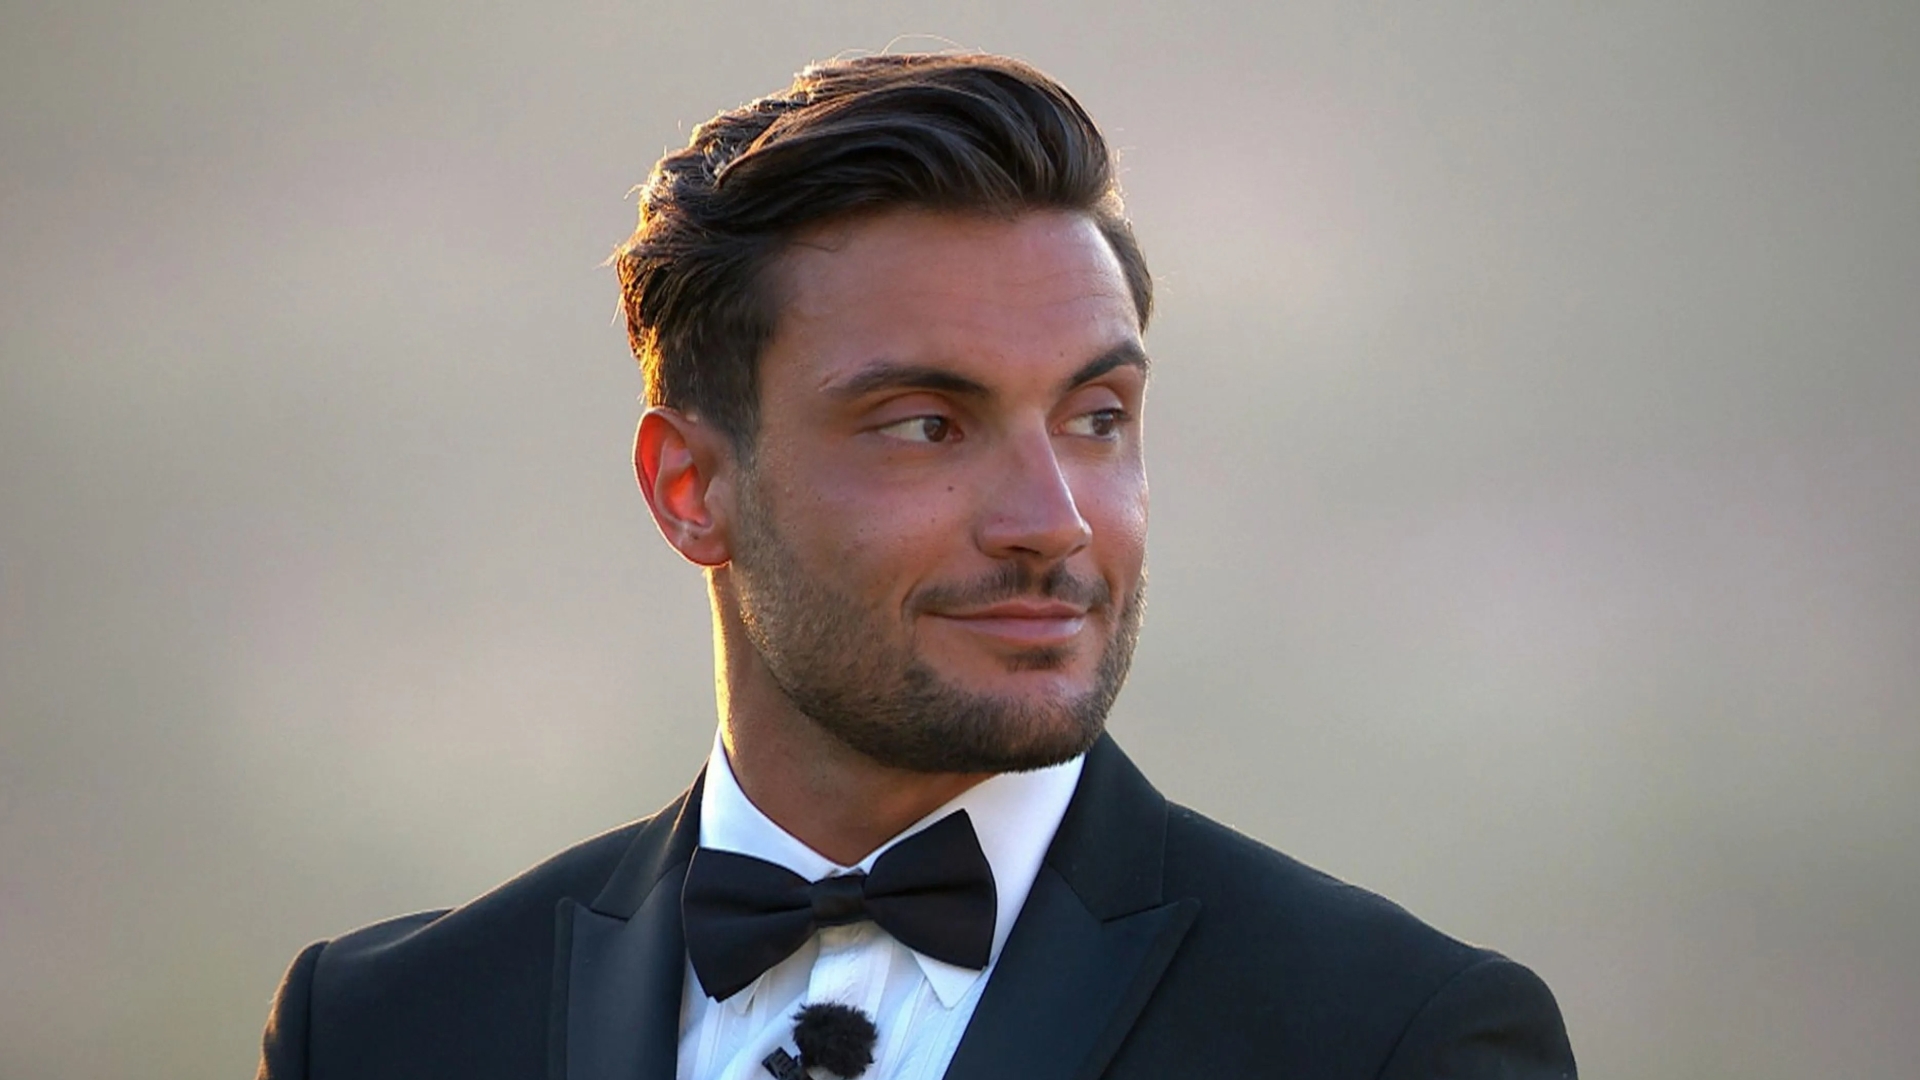 Davide Sanclimenti is who? And when was he crowned Love Island’s winner?